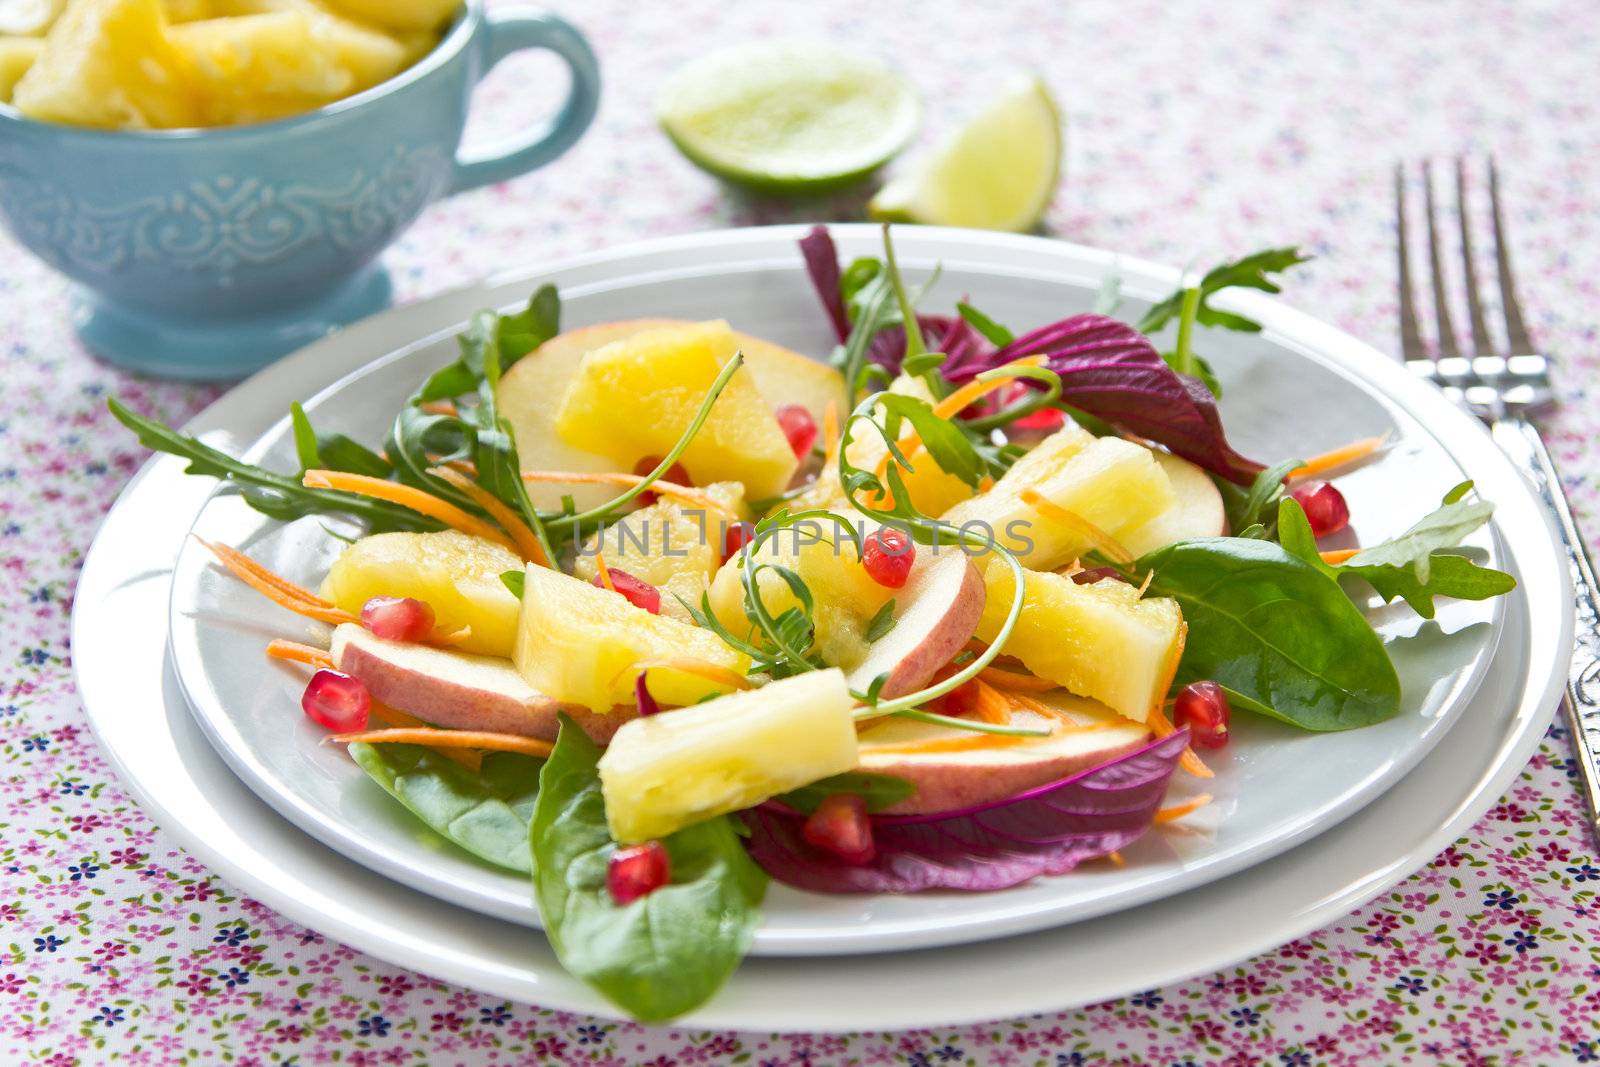 Pineapple with pomegranate and spinach salad by vanillaechoes